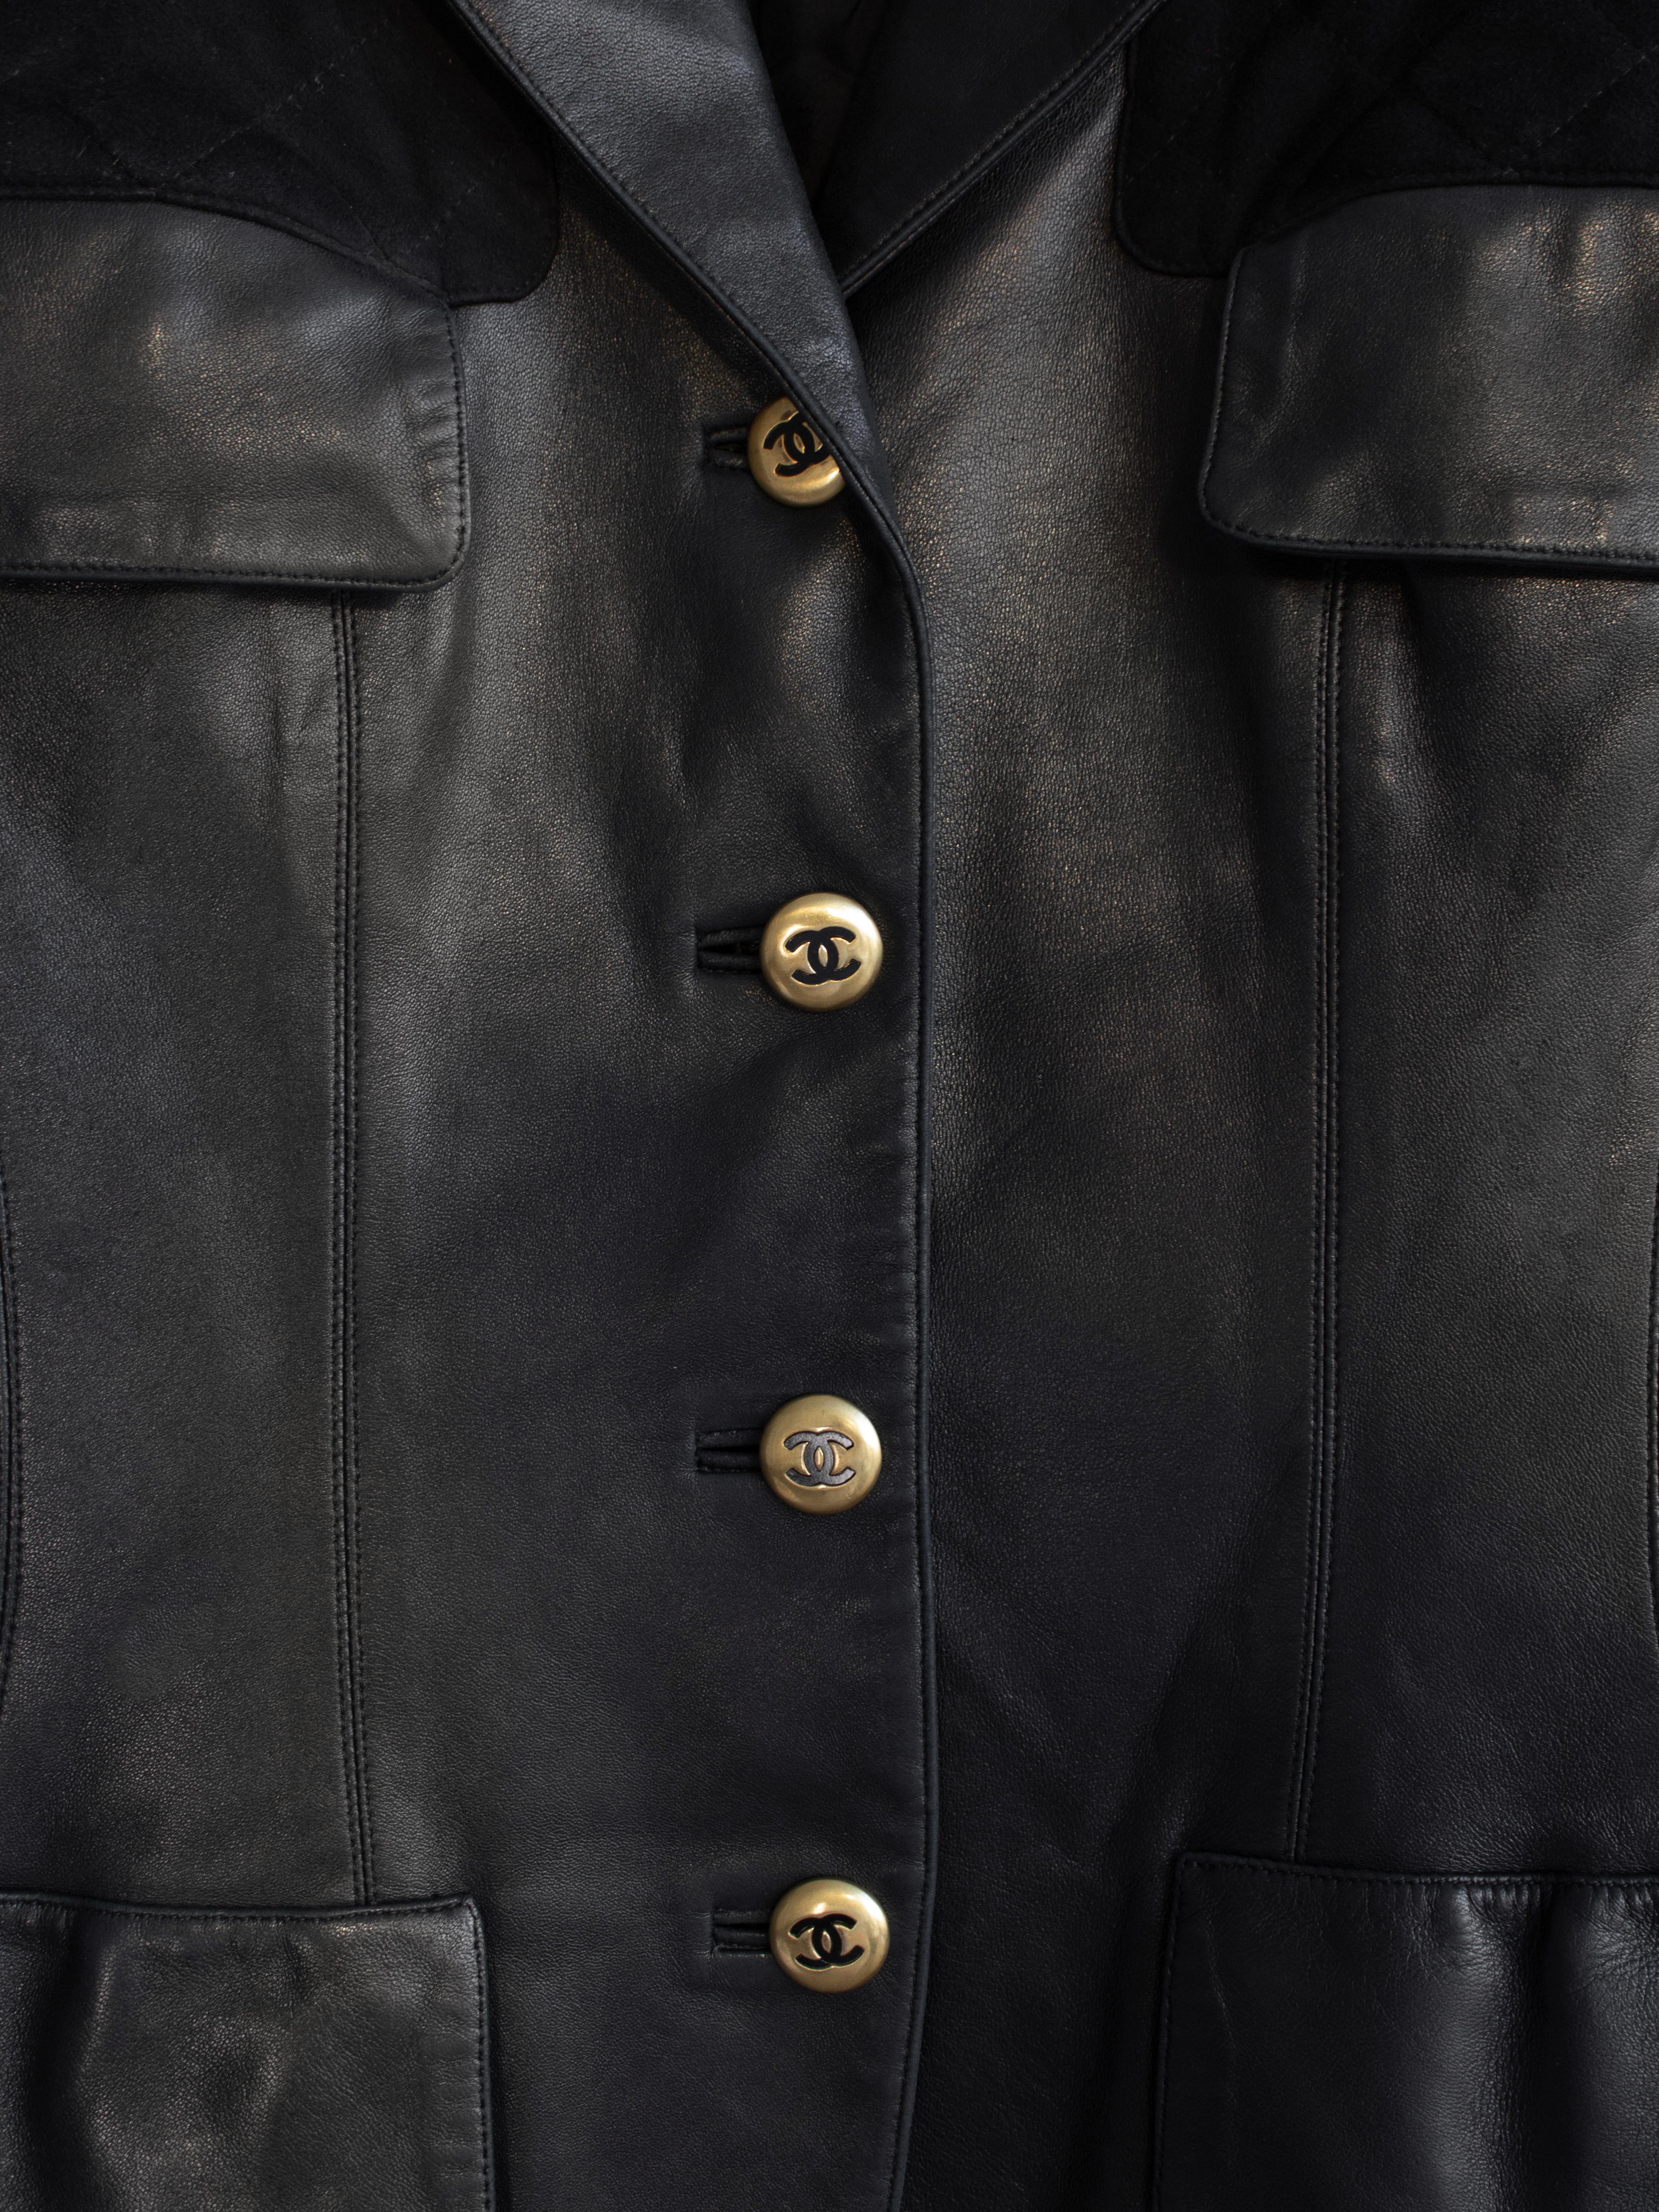 Iconic Chanel Vintage F/W 1992 Black Gold CC Lambskin Leather Suede Jacket 5